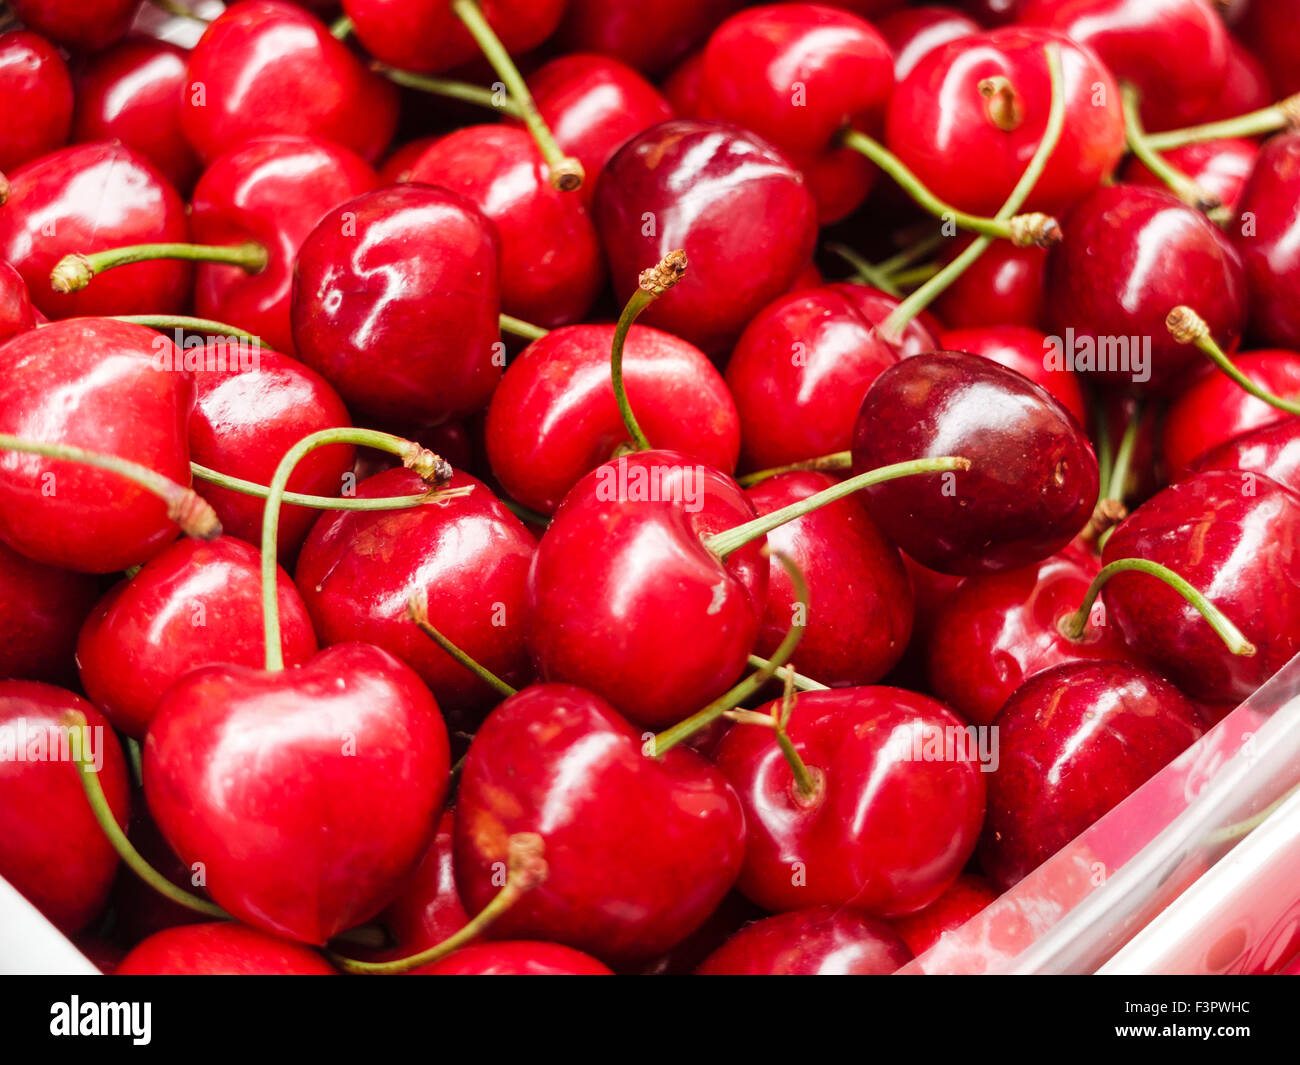 Italy, Emilia-Romagna region, Bologna - market food sellers. Fruit and vegetable market. Cherries from Puglia. Stock Photo